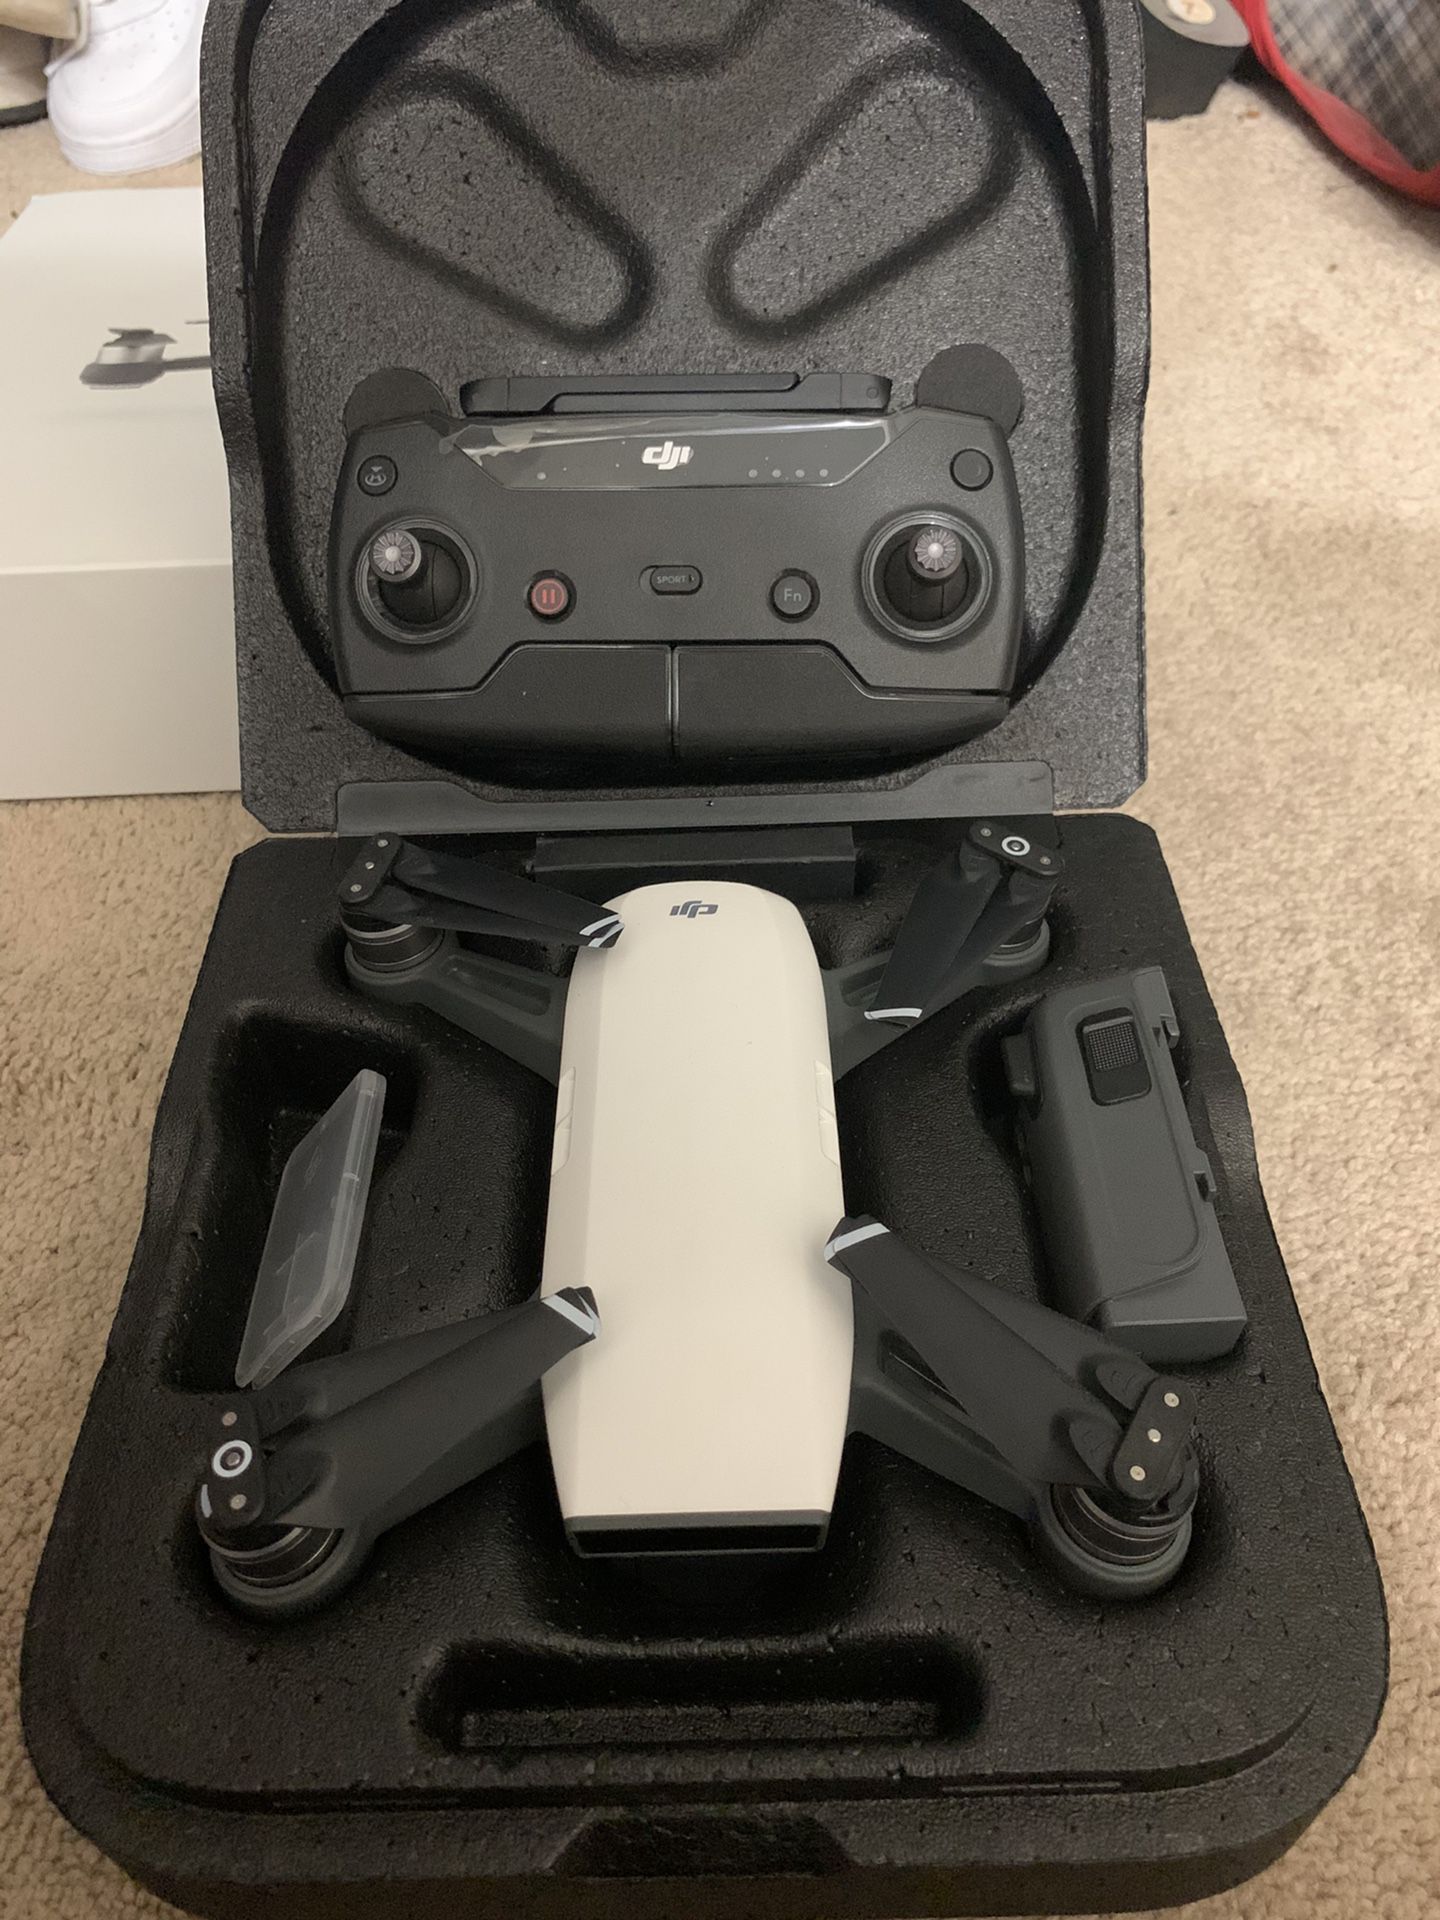 DJI SPARK CONTROLLER COMBO WITH IPHONE 5 READY